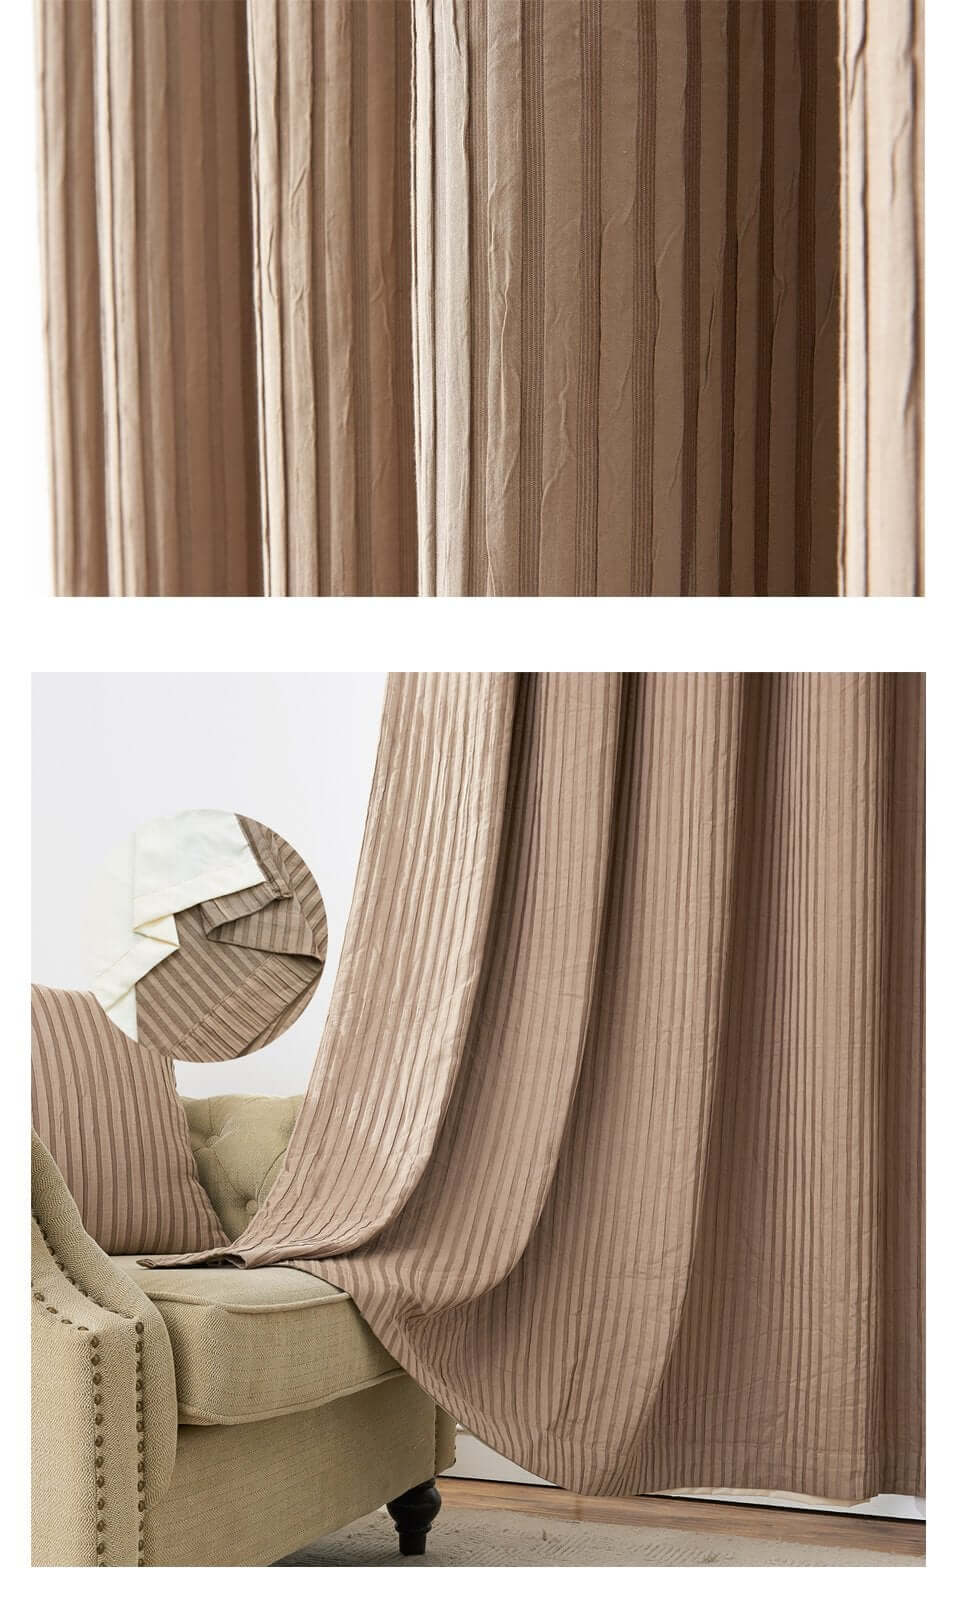 Decorative Window Curtains With Lining - NOFRAN